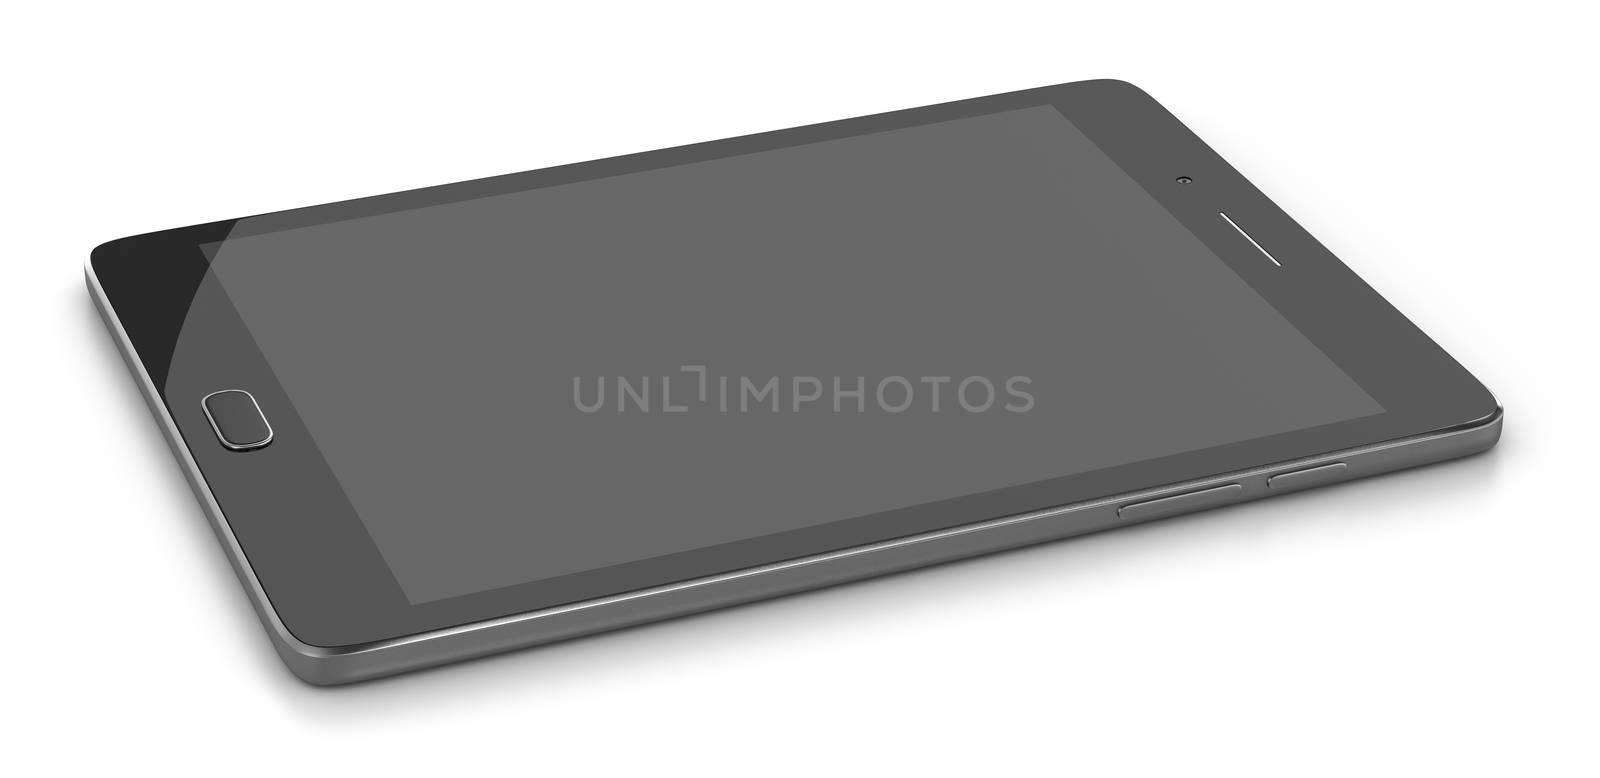 Tablet Pc Turned Off with Blank Display on White Background 3D Illustration